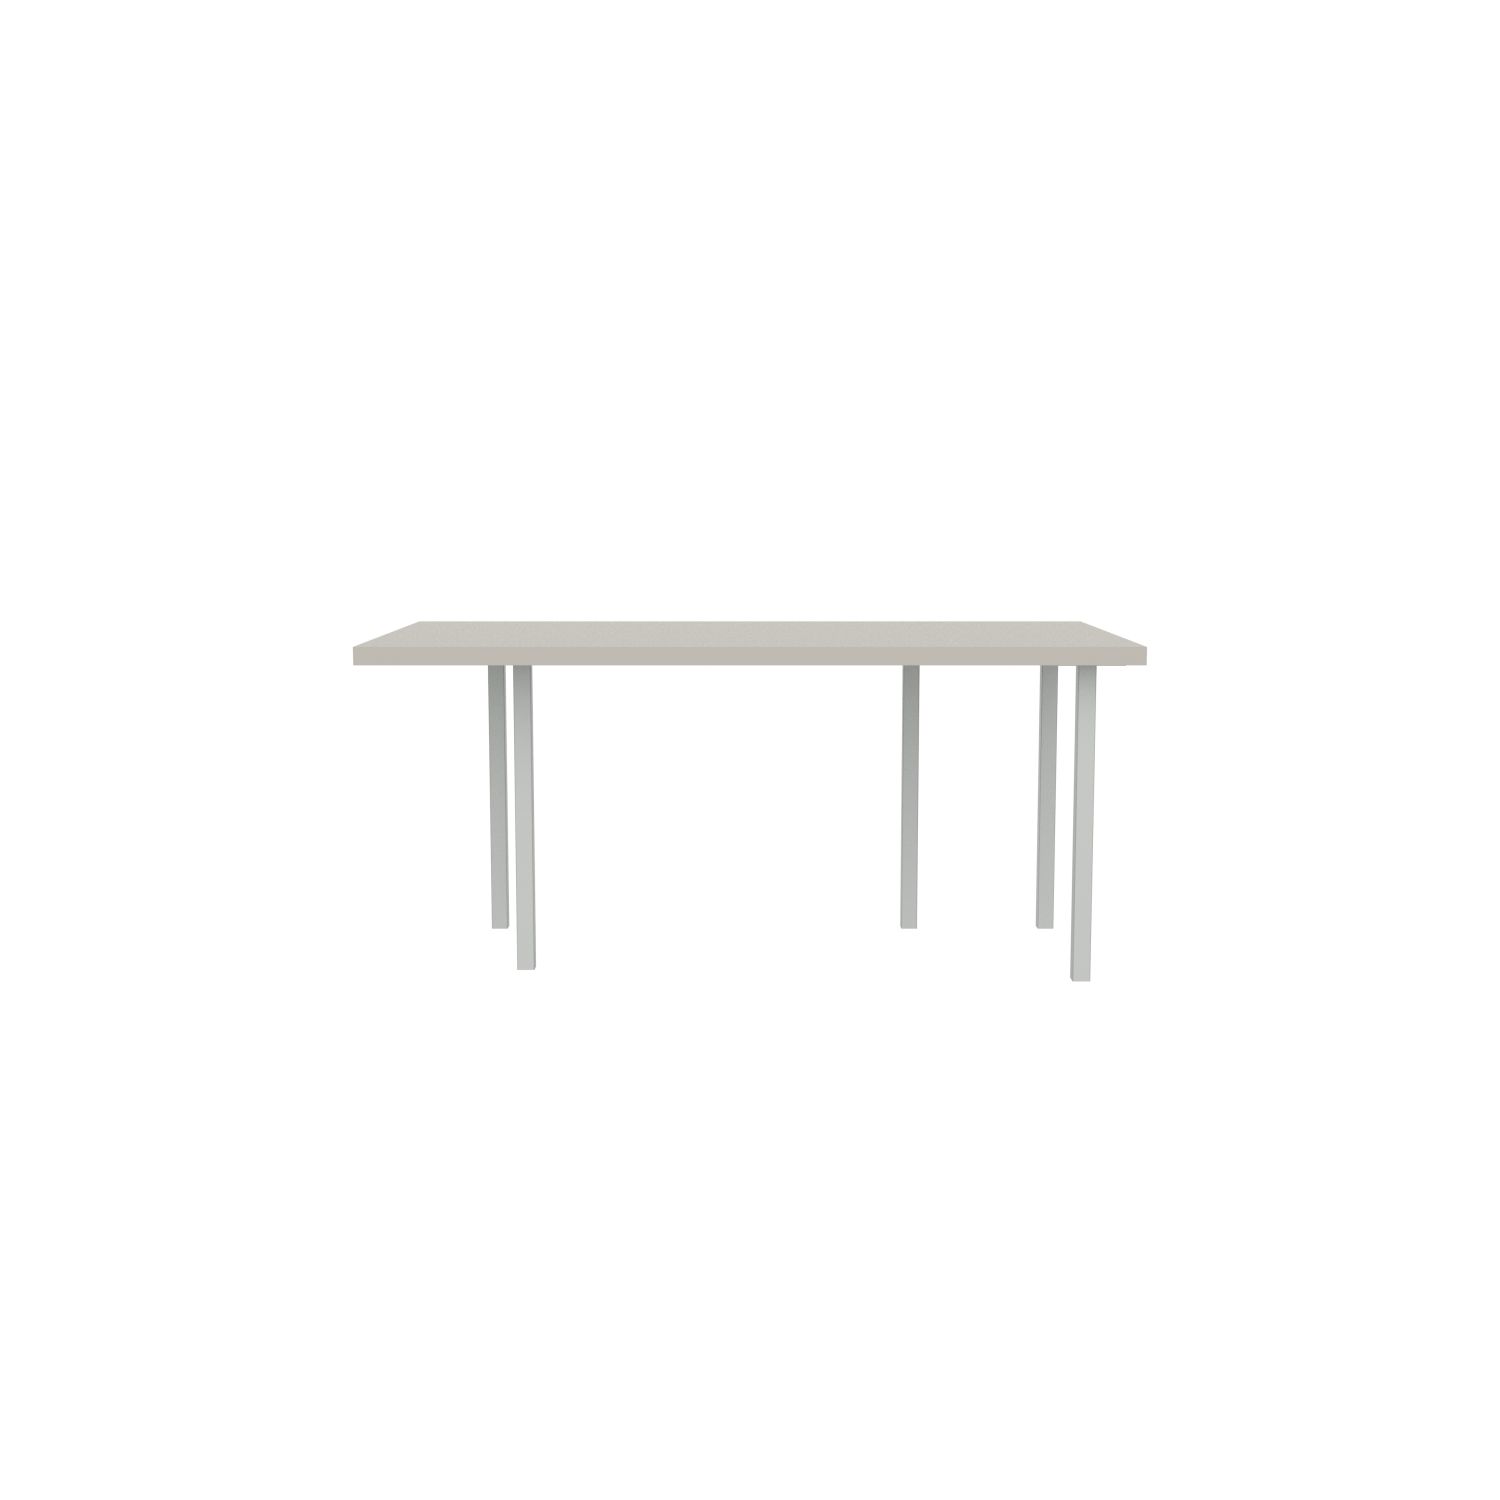 lensvelt bbrand table five fixed heigt 915x172 hpl white 50 mm price level 1 light grey ral7035